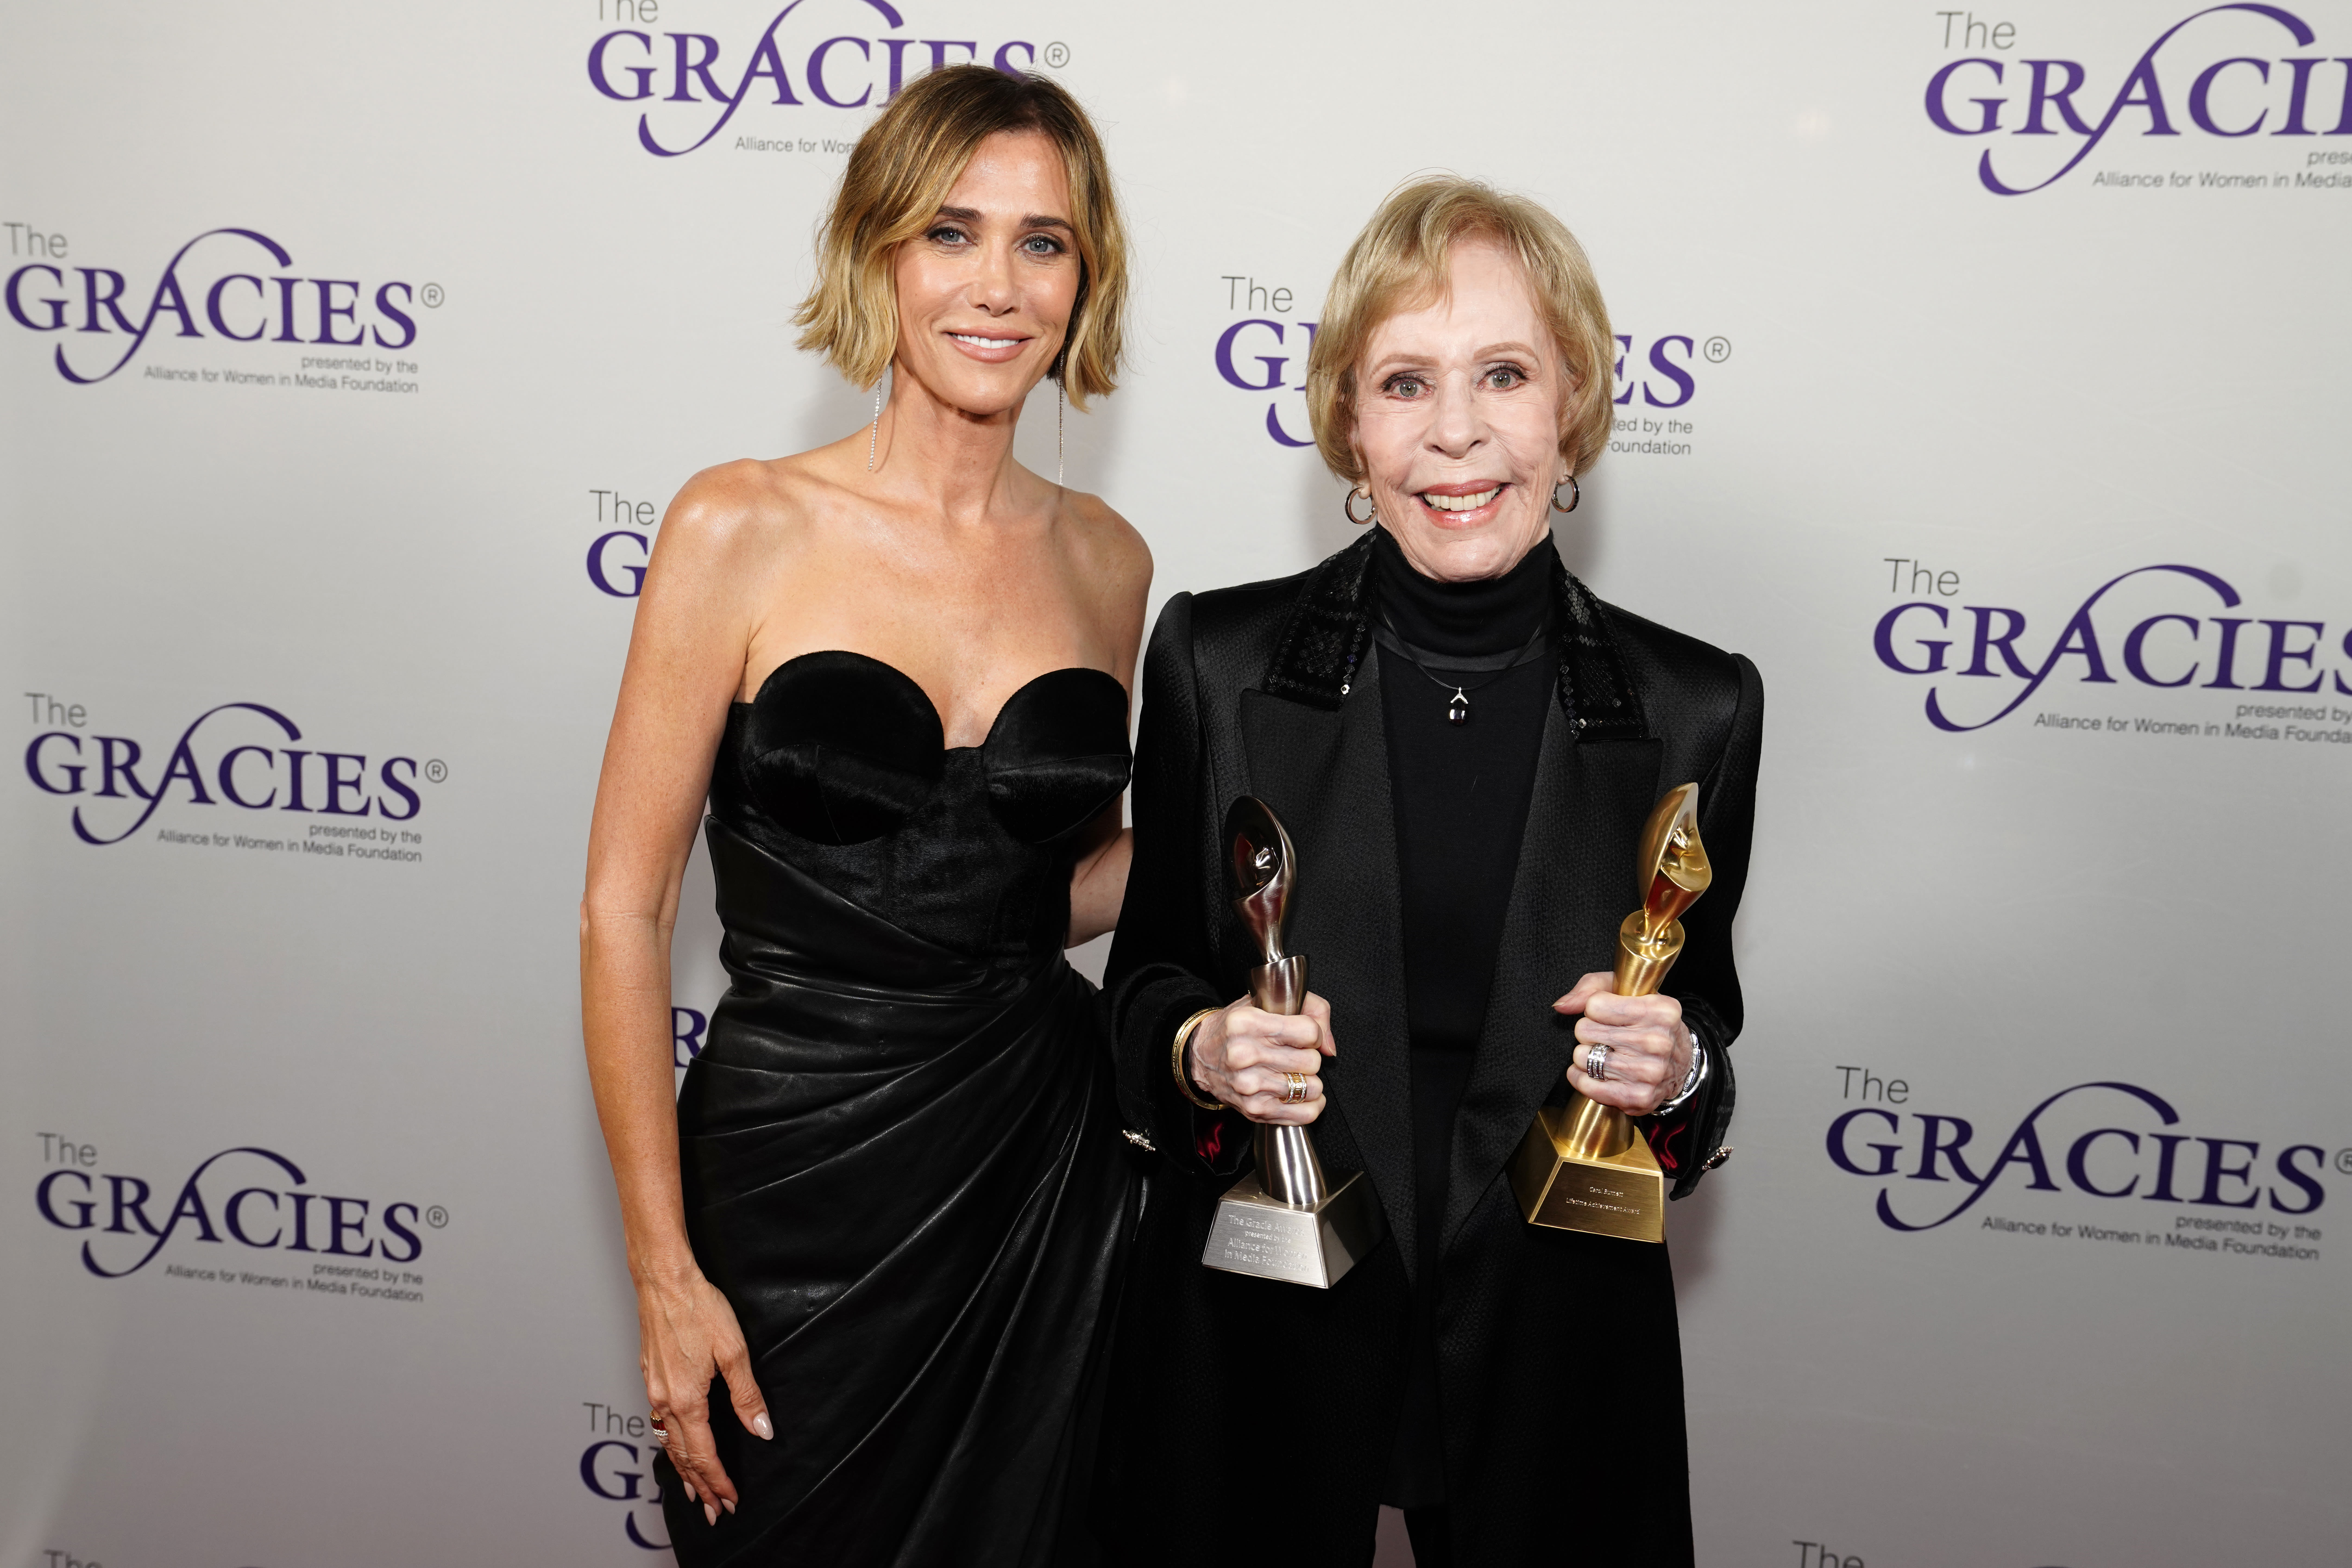 Kristen Wiig Says Watching Carol Burnett on TV Planted Her ‘First Creative Seeds’: ‘It’s Like You’re My Oldest Friend’